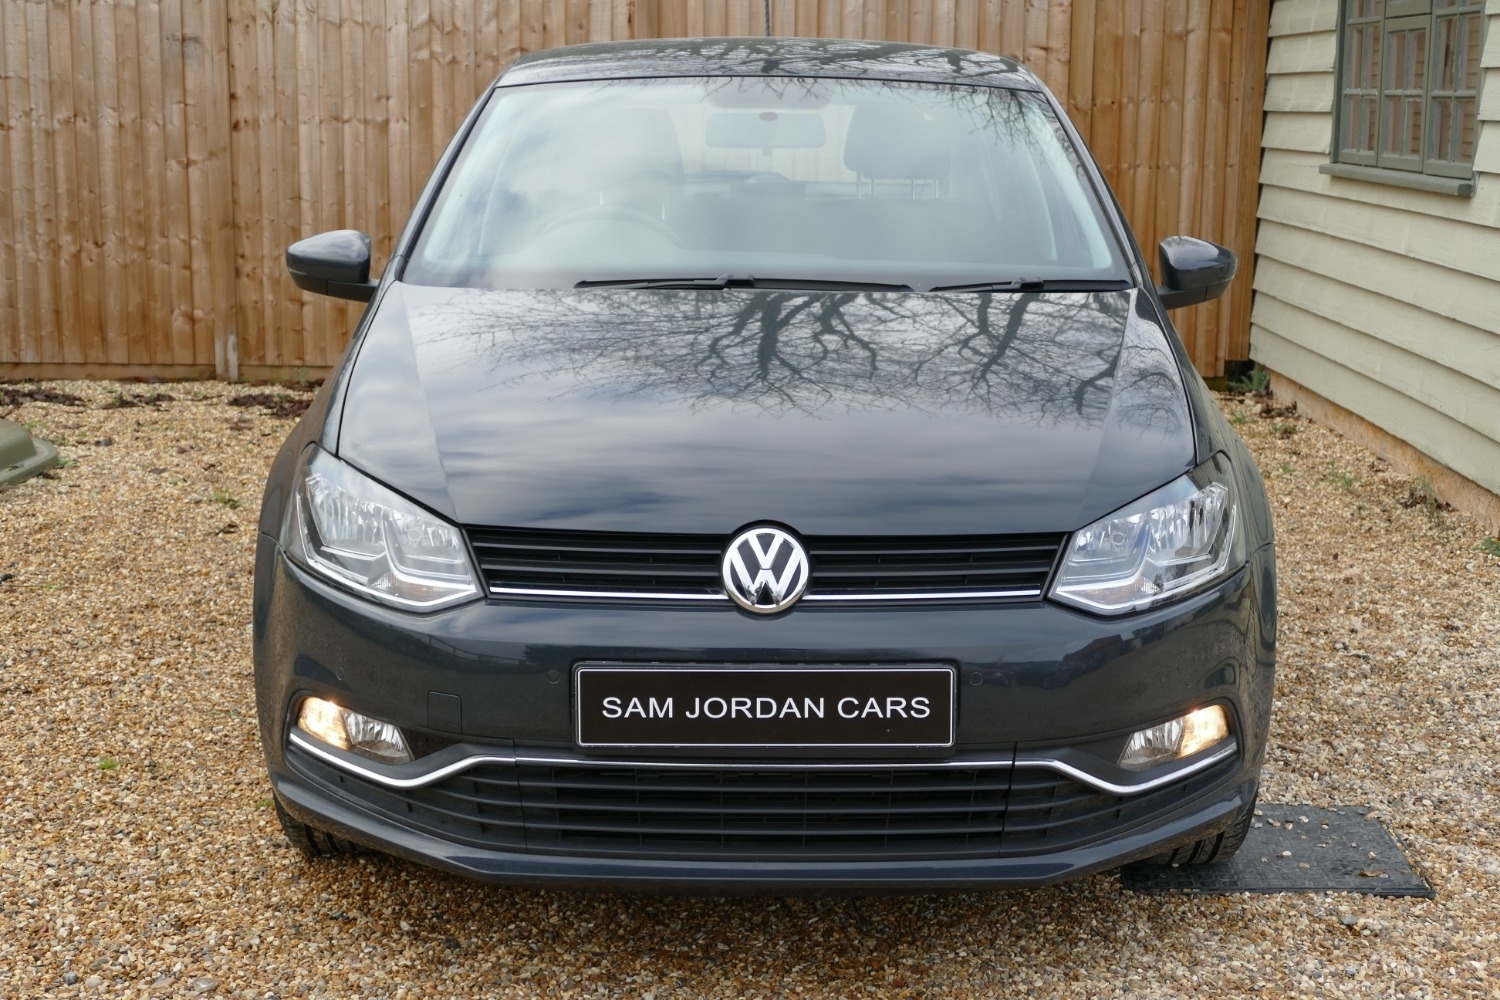 Used VOLKSWAGEN POLO in Bury St Edmunds, Suffolk